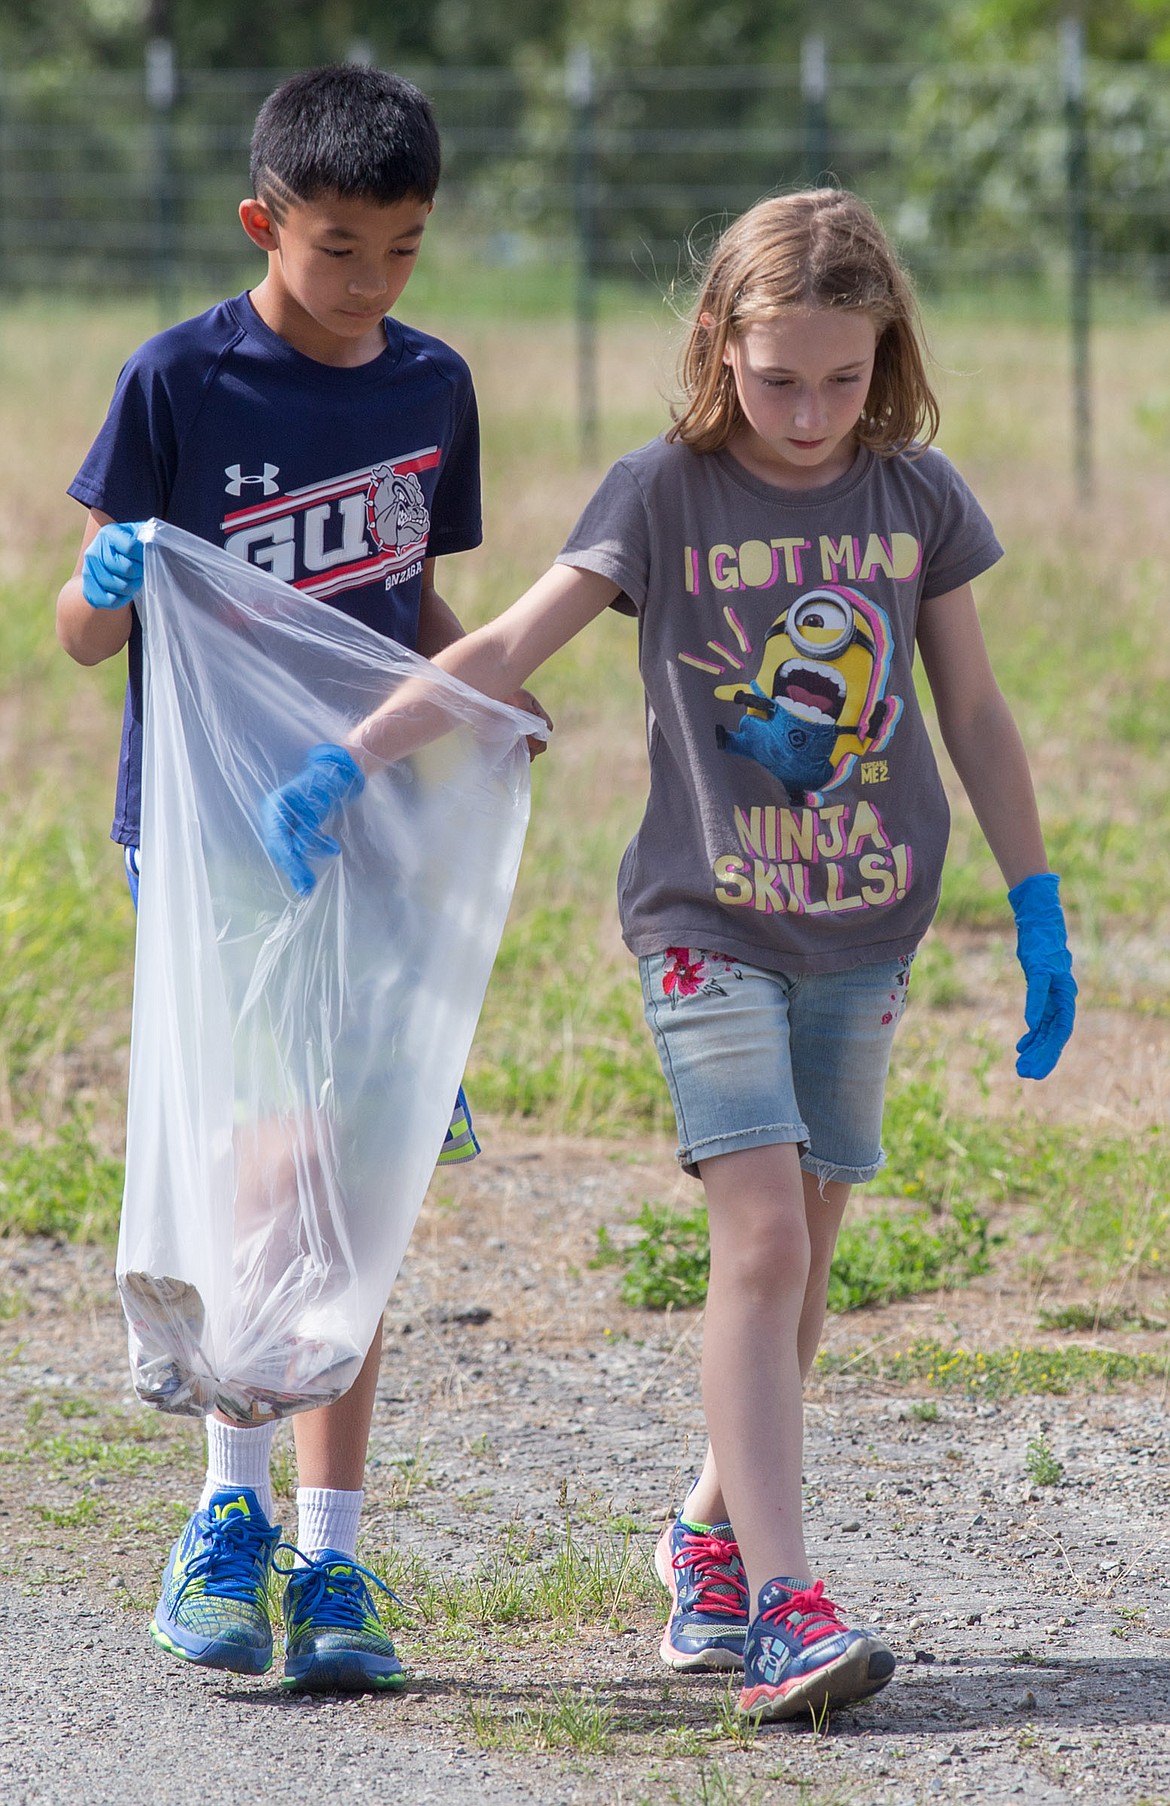 Libby Elementary School fifth-graders Gabe Gier and Annika Benner pick up trash along Treasure Avenue next to Libby Cemetery Wednesday, June 7, 2017. (John Blodgett/The Western News)